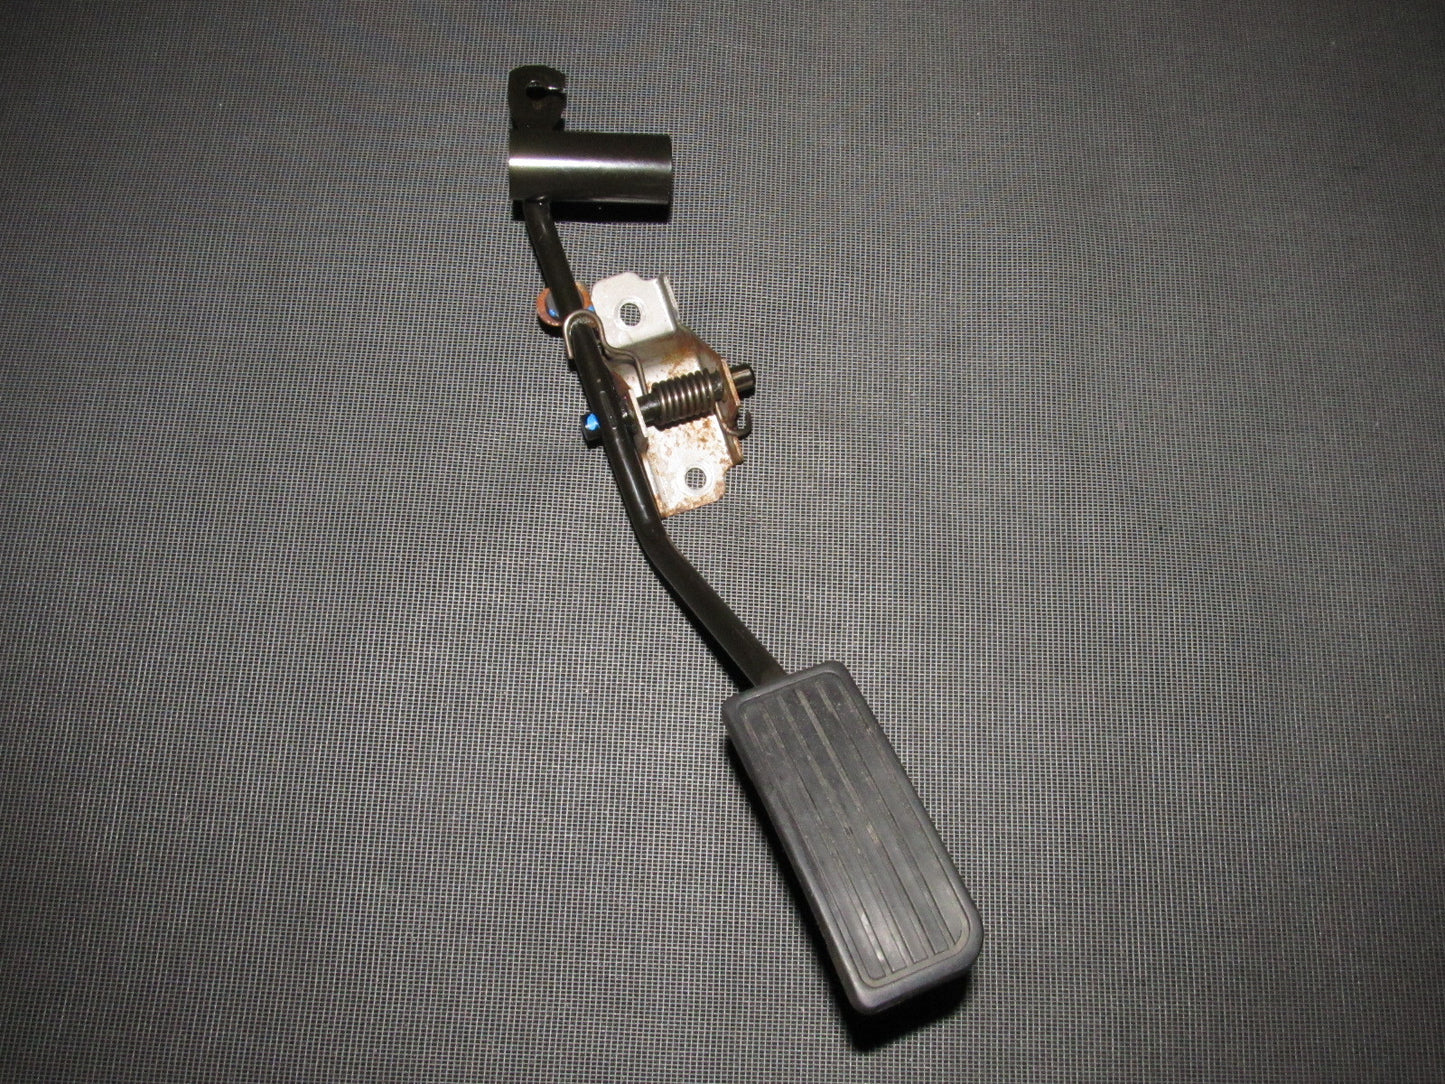 01 02 03 Acura CL OEM Gas Pedal